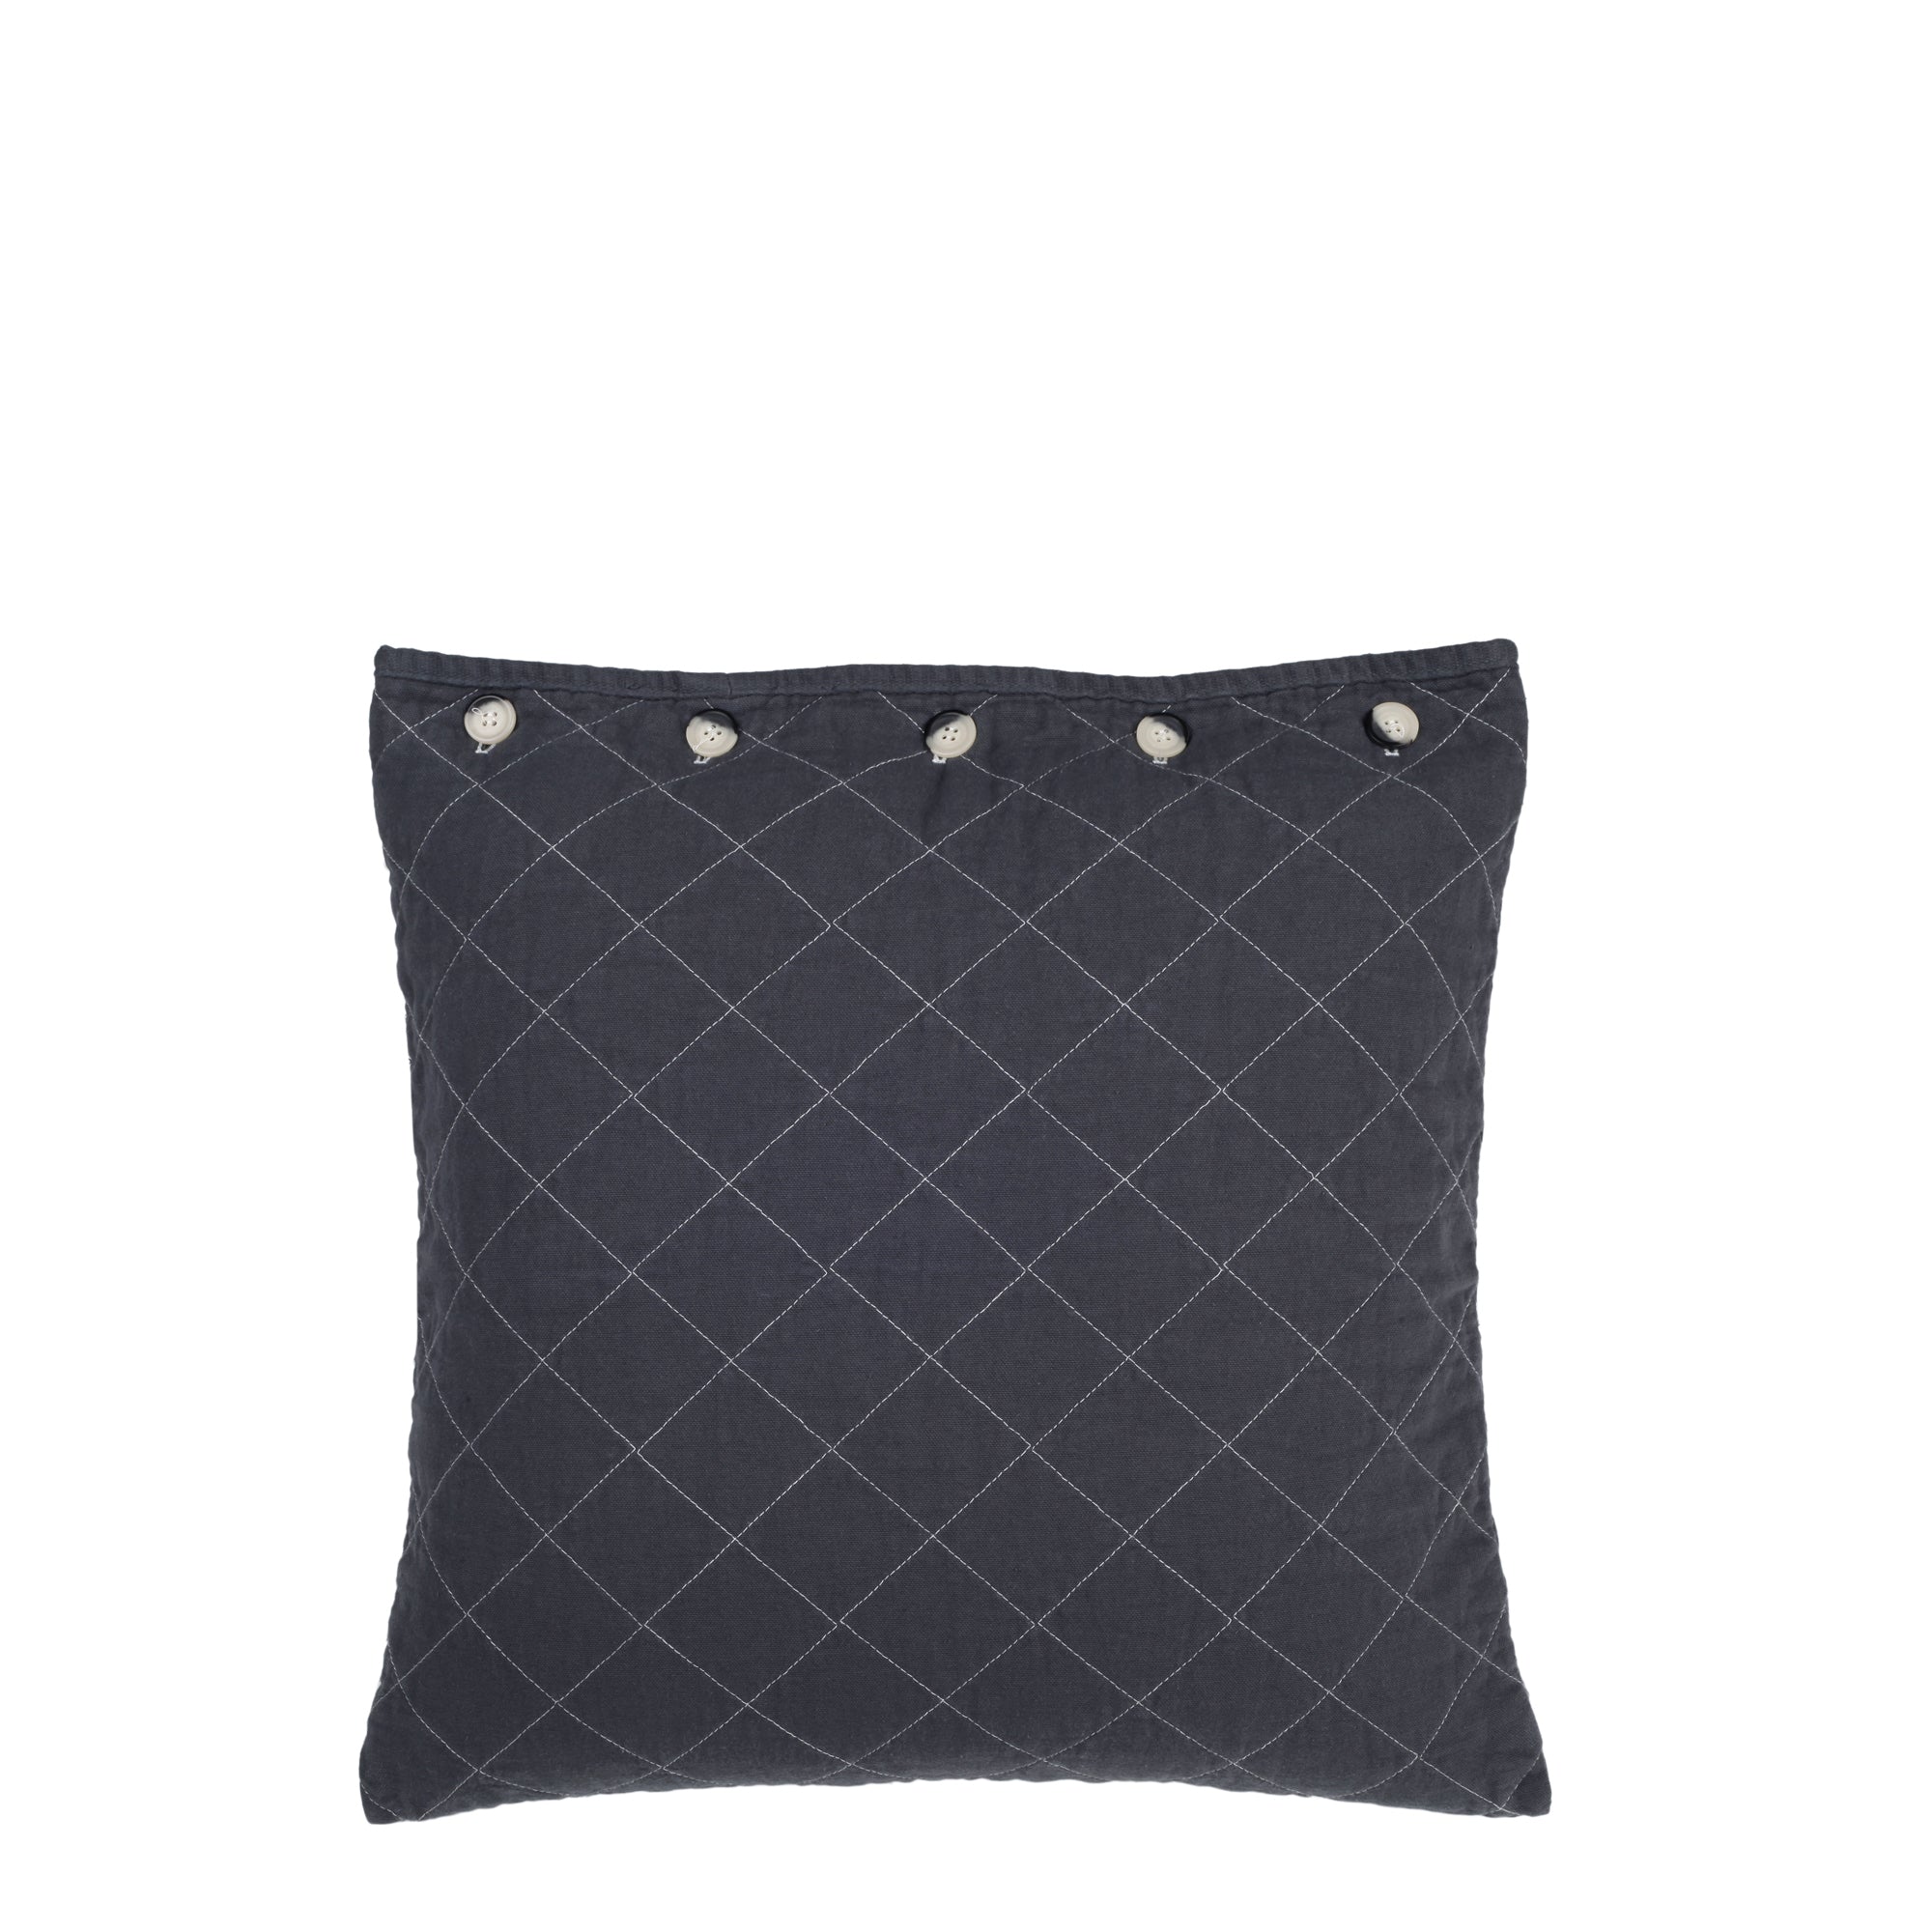 Solid Charcoal Gray Accent Pillows